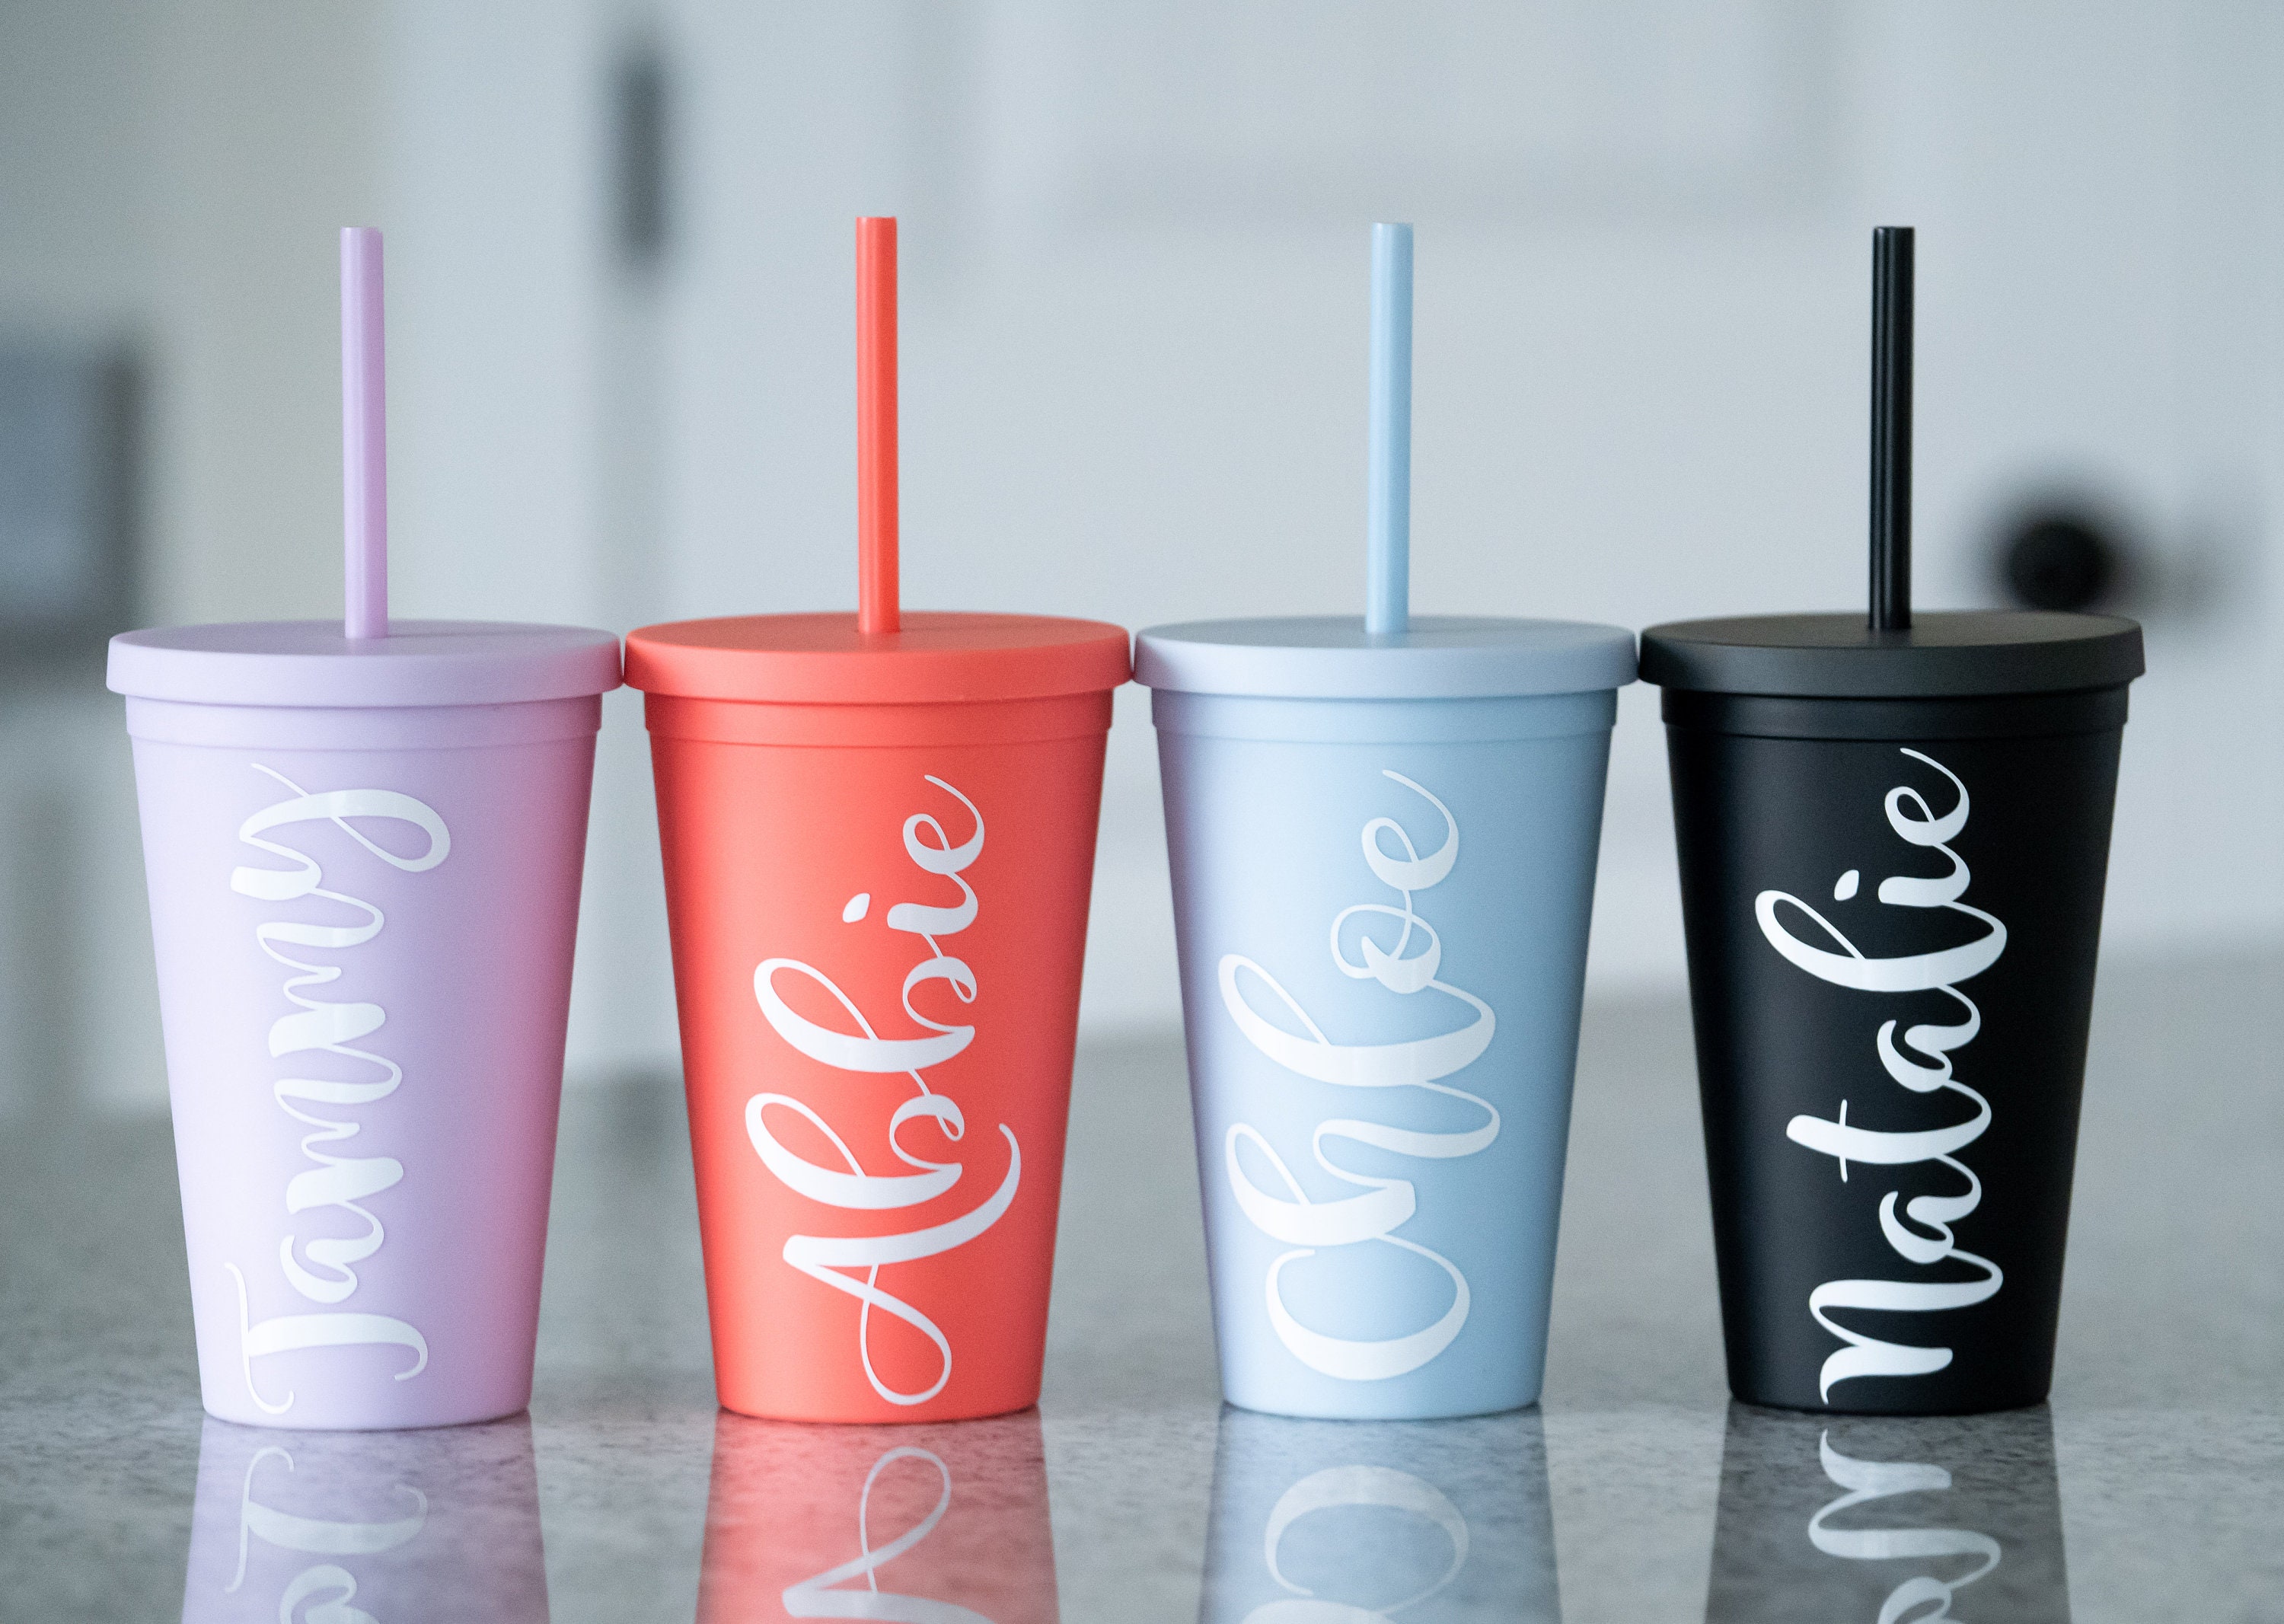 Tumblers with Lids (12 Pack) 16oz Colored Acrylic Cups with Lids and Straws | Double Wall Matte Plastic Bulk Tumblers with Free Straw Cleaner! Vinyl